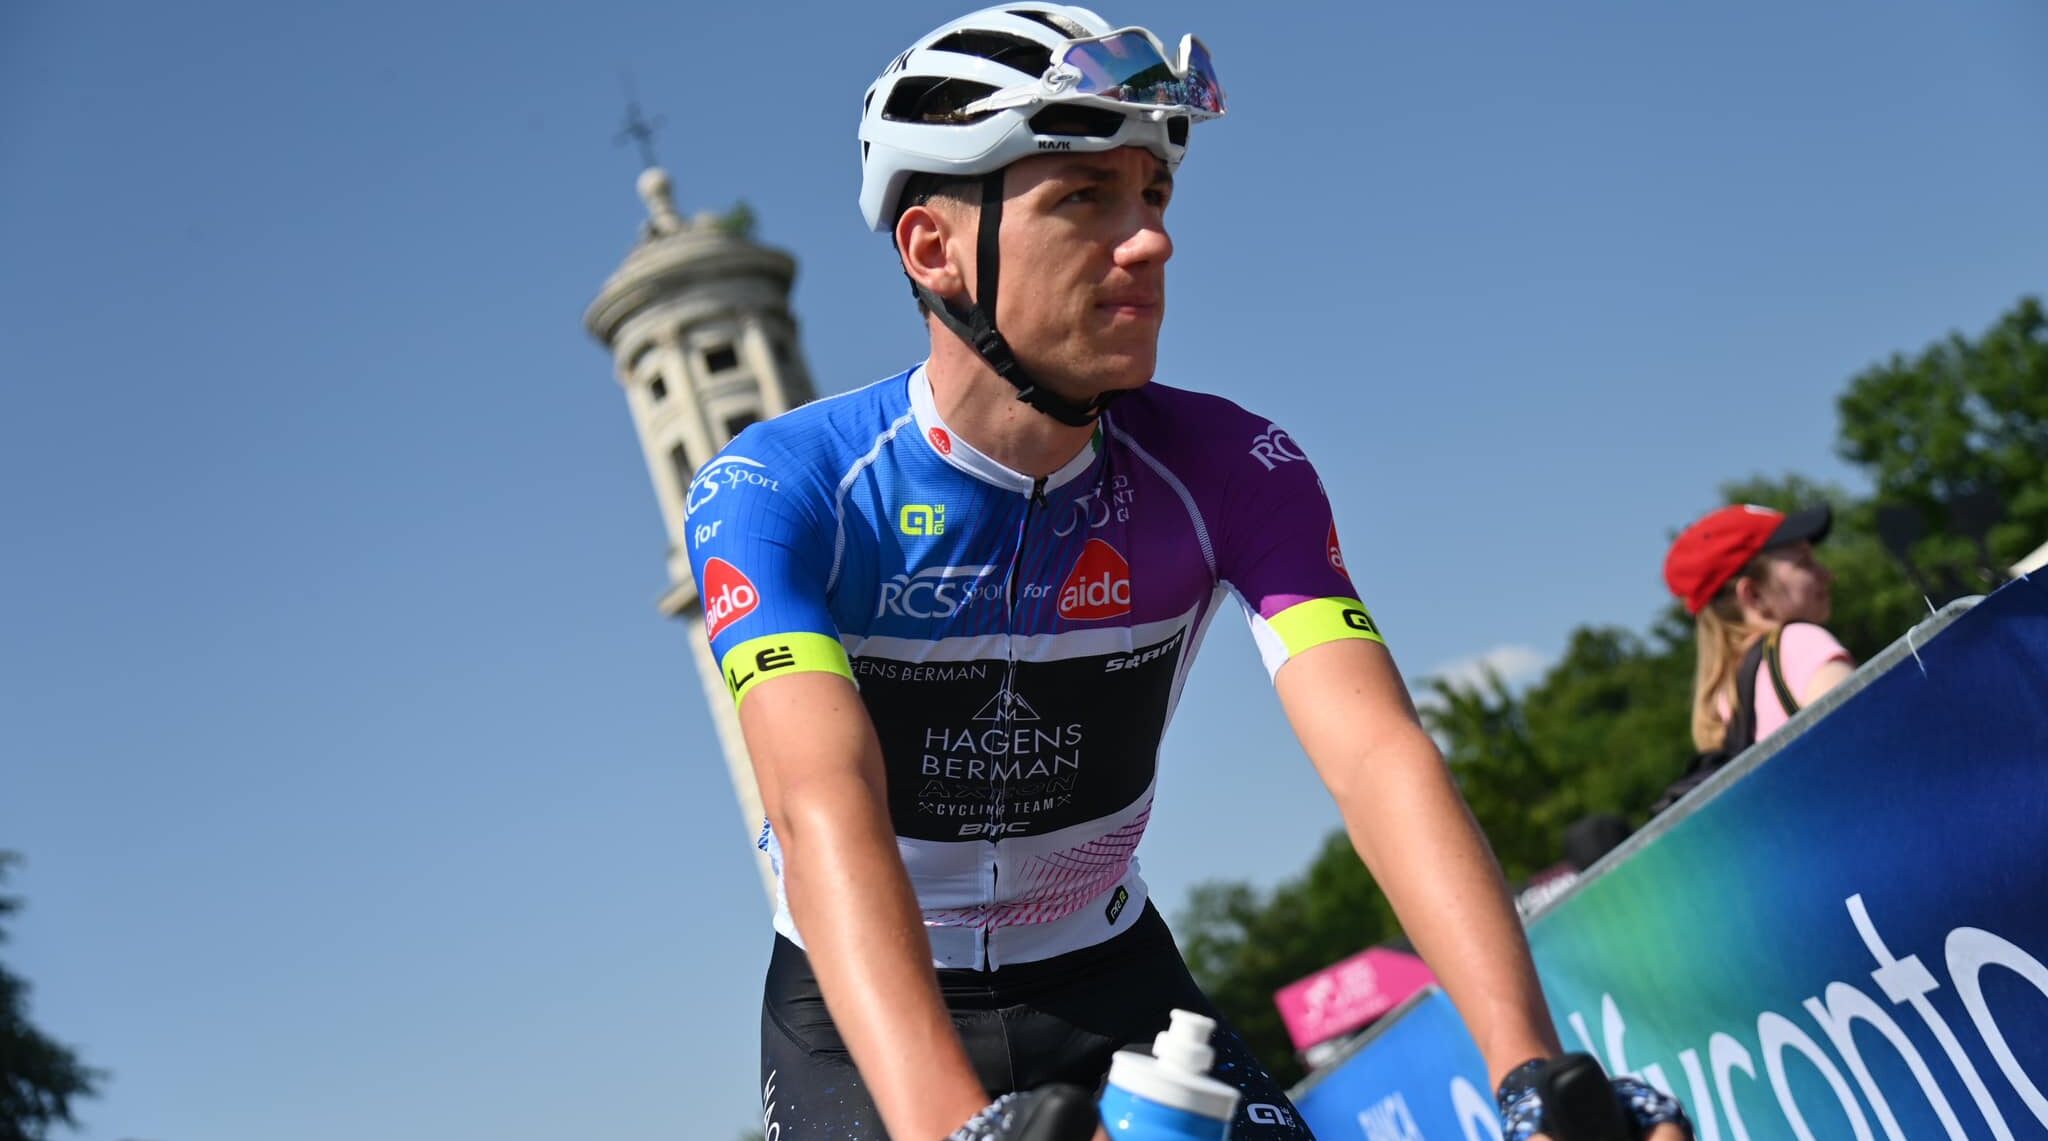 Rafferty set for first EF Education camp | “There’s always a bit of nerves”